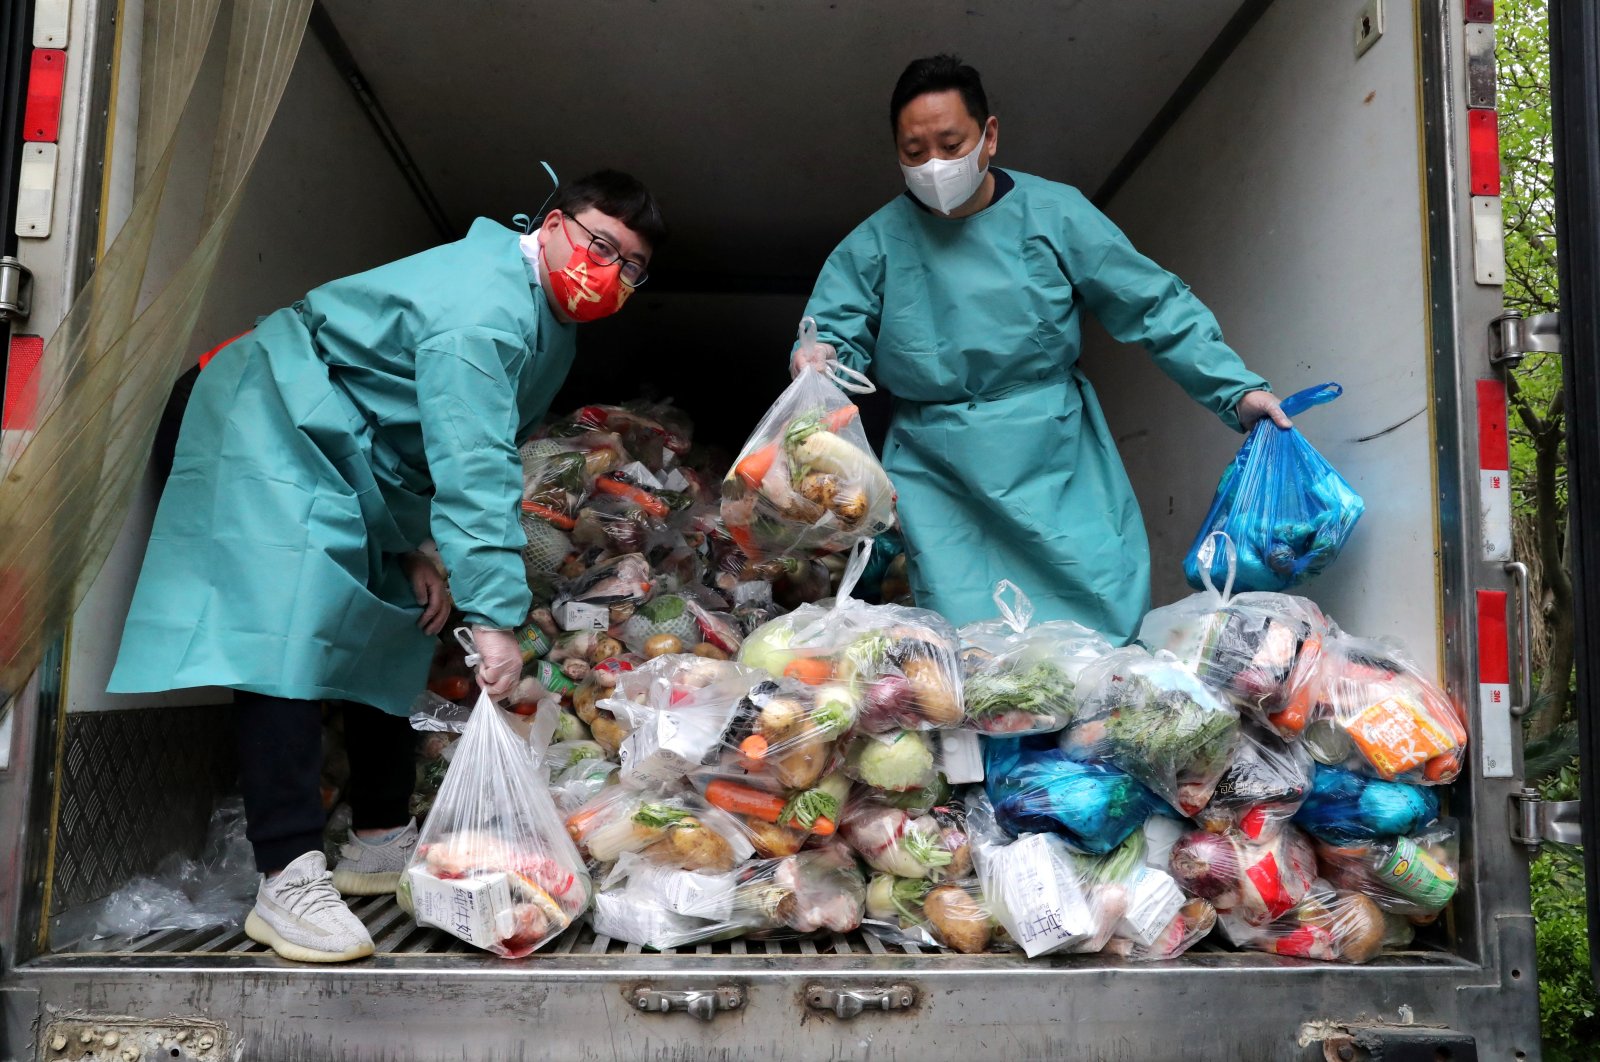 Workers wearing protective gear sort bags of vegetables and groceries on a truck to distribute them to residents at a residential compound, during the lockdown to curb the coronavirus outbreak in Shanghai, China, April 5, 2022. (China Daily via Reuters)